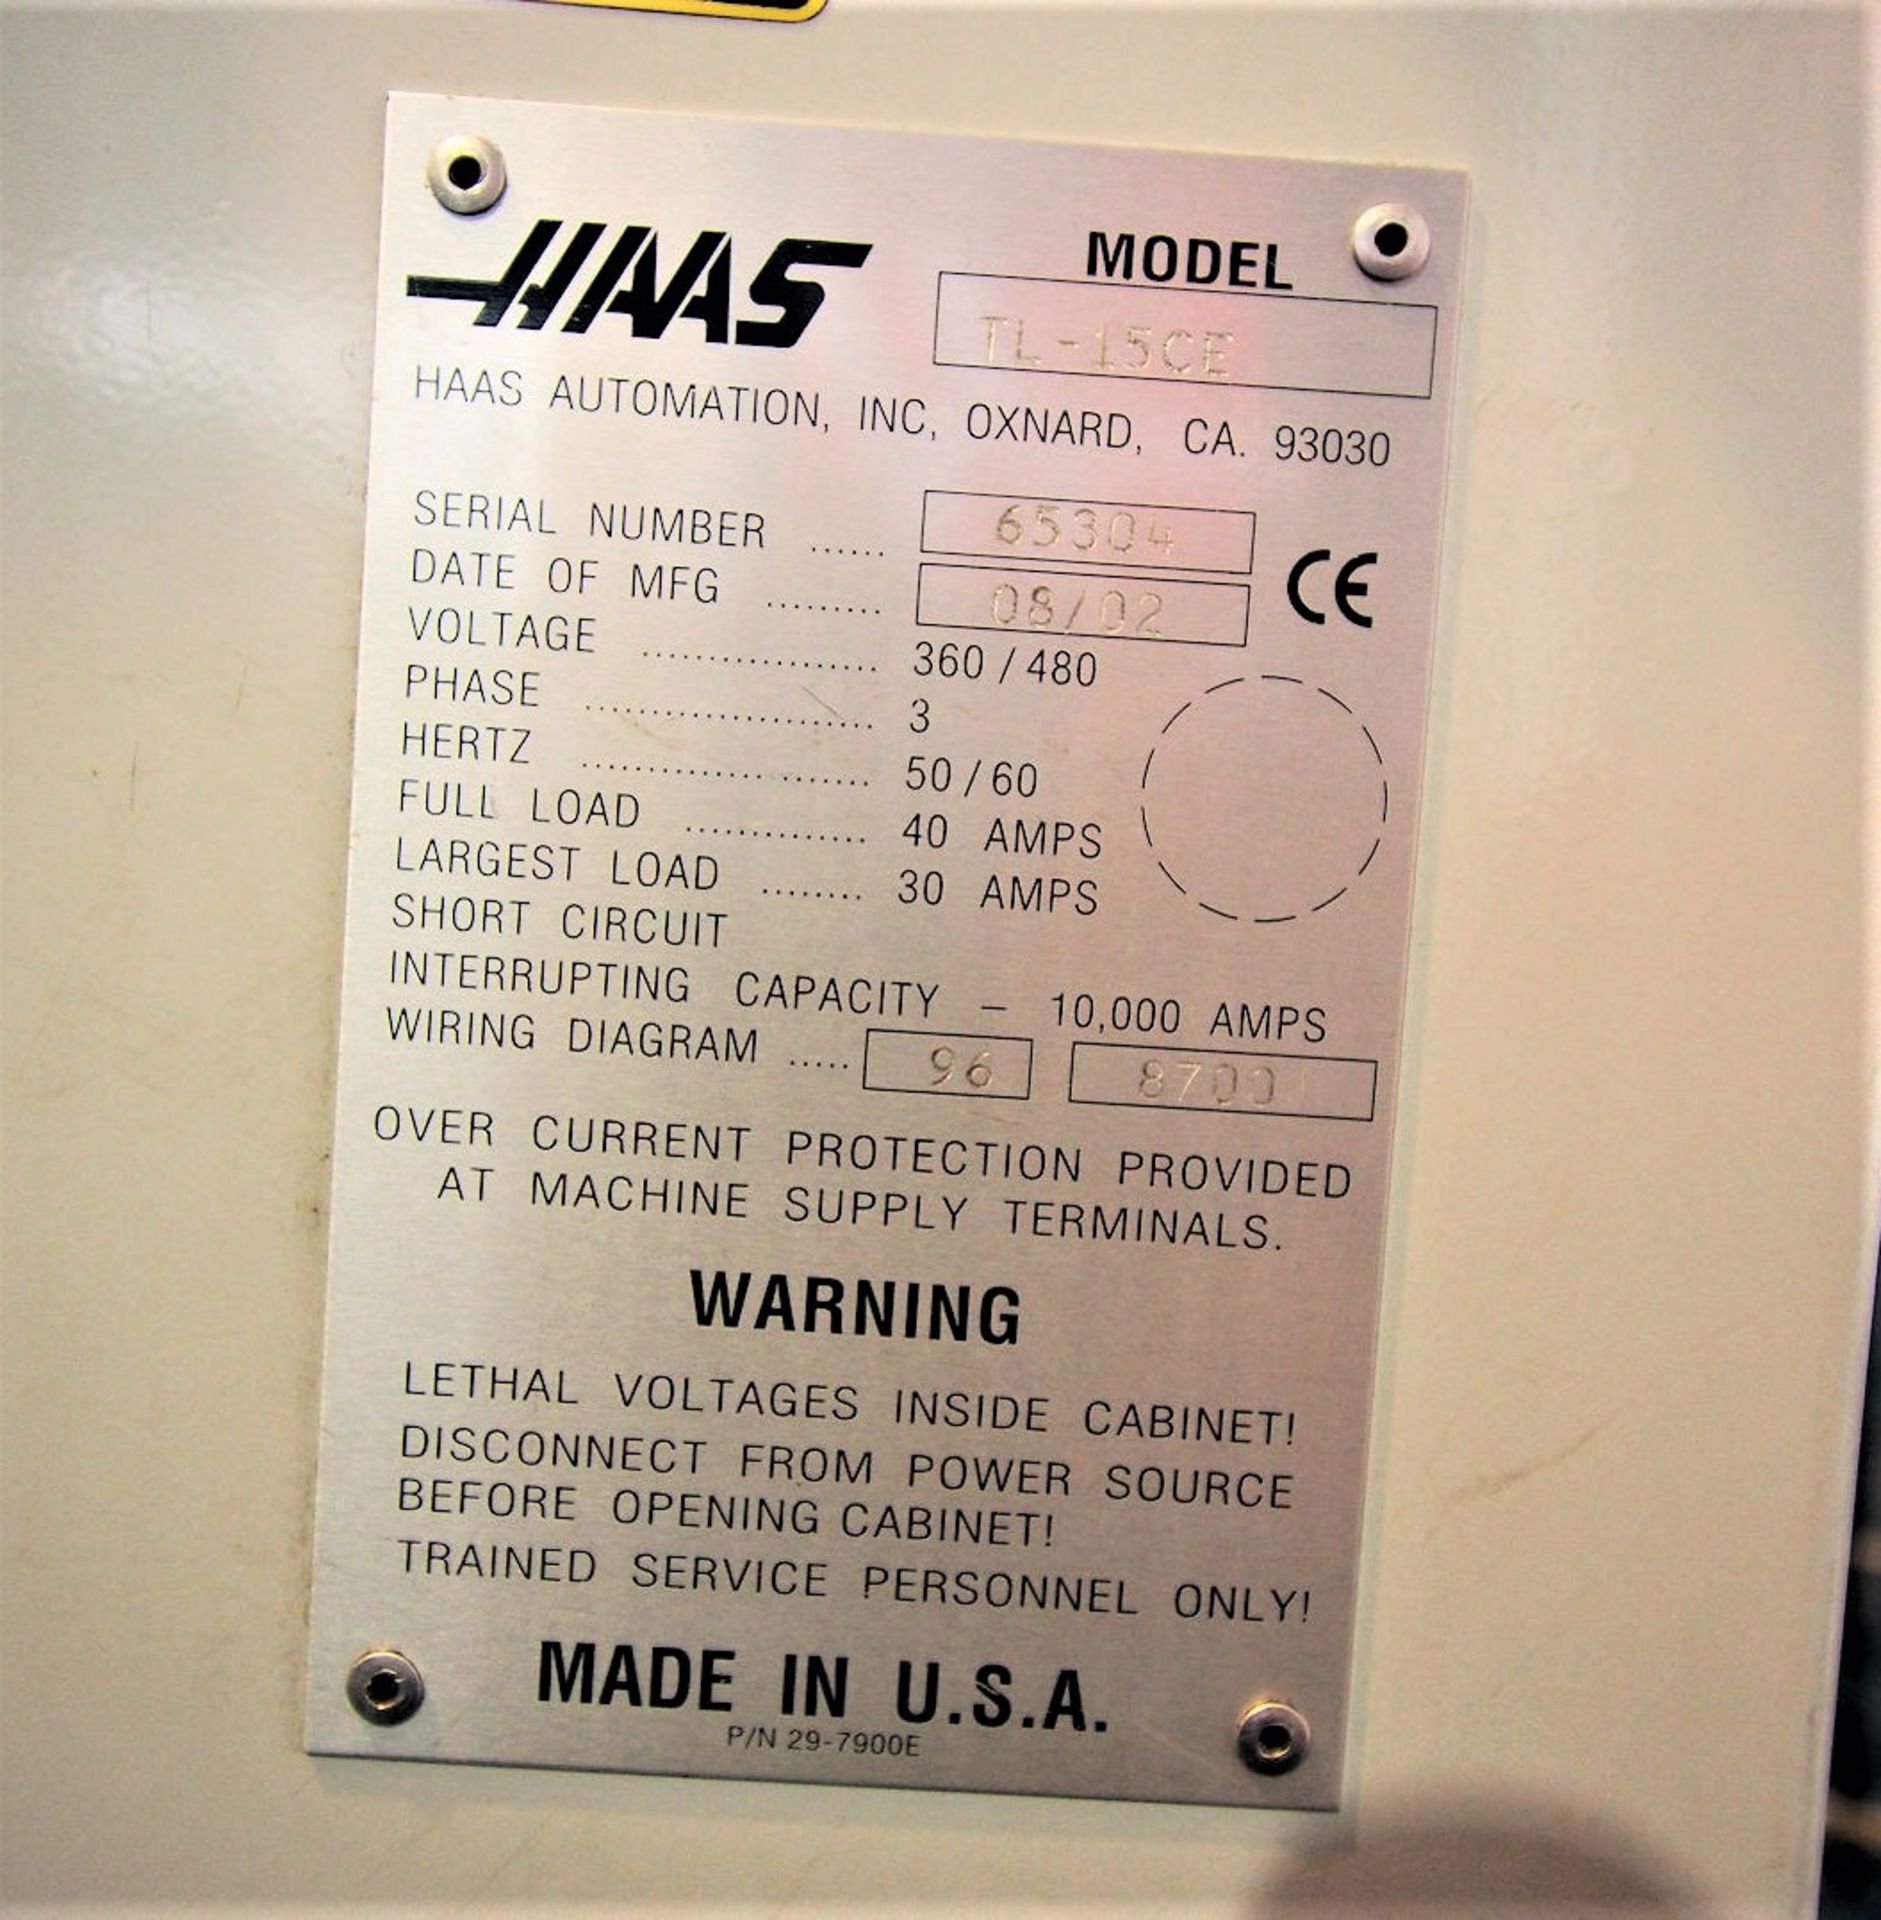 Haas TL-15 CNC Lathe, w/Sub Spindle, S/N 65304, New 2002 - Image 9 of 9